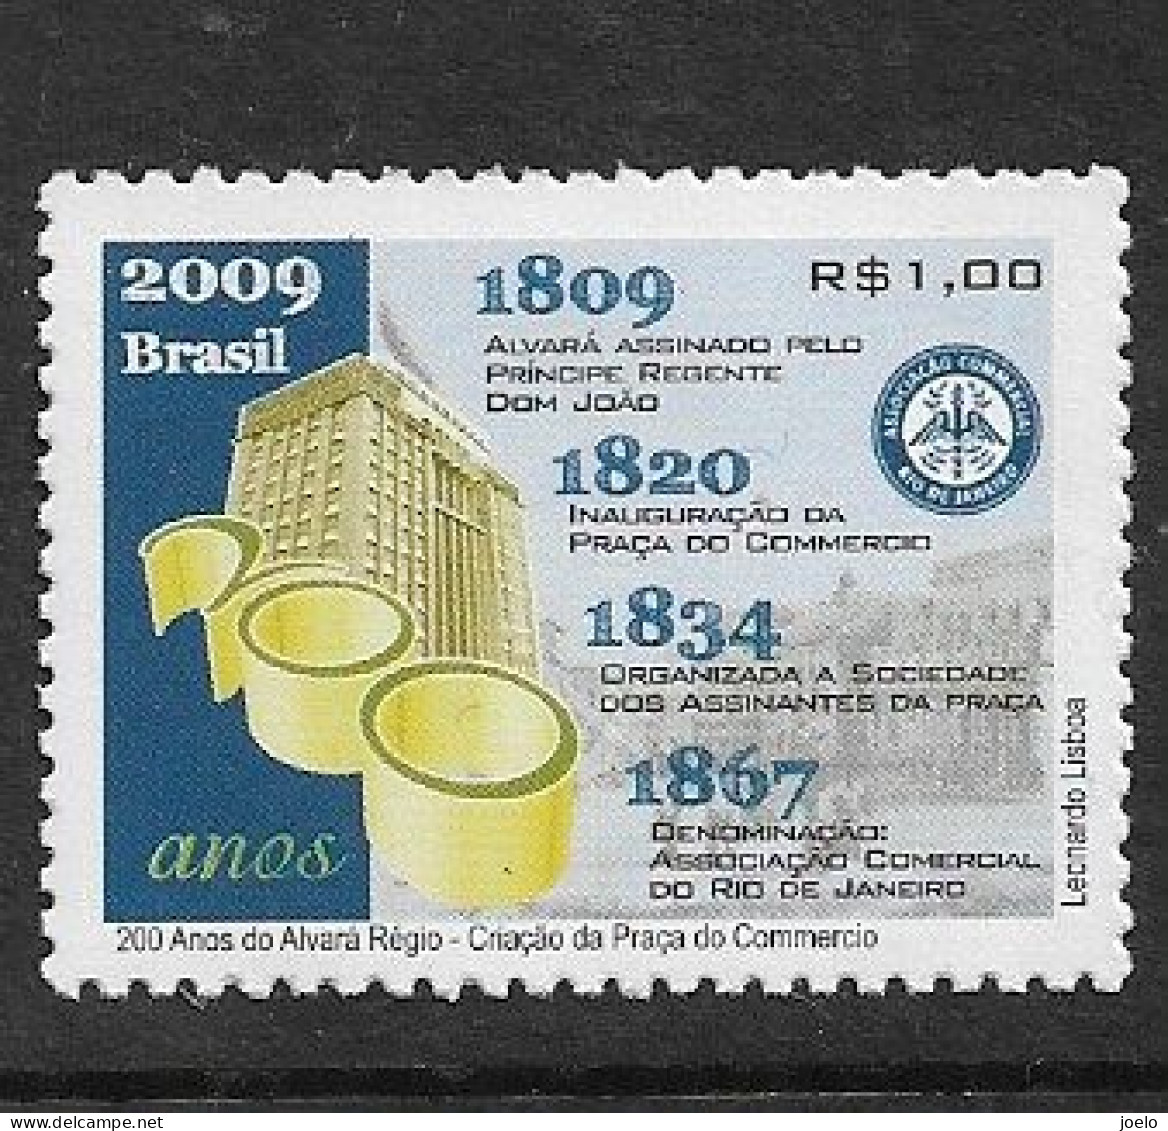 BRAZIL 2009 COMMERCIAL ASSOCIATION EMBLEMATIC BUILDING IN RIO DE JANEIRO - Unused Stamps